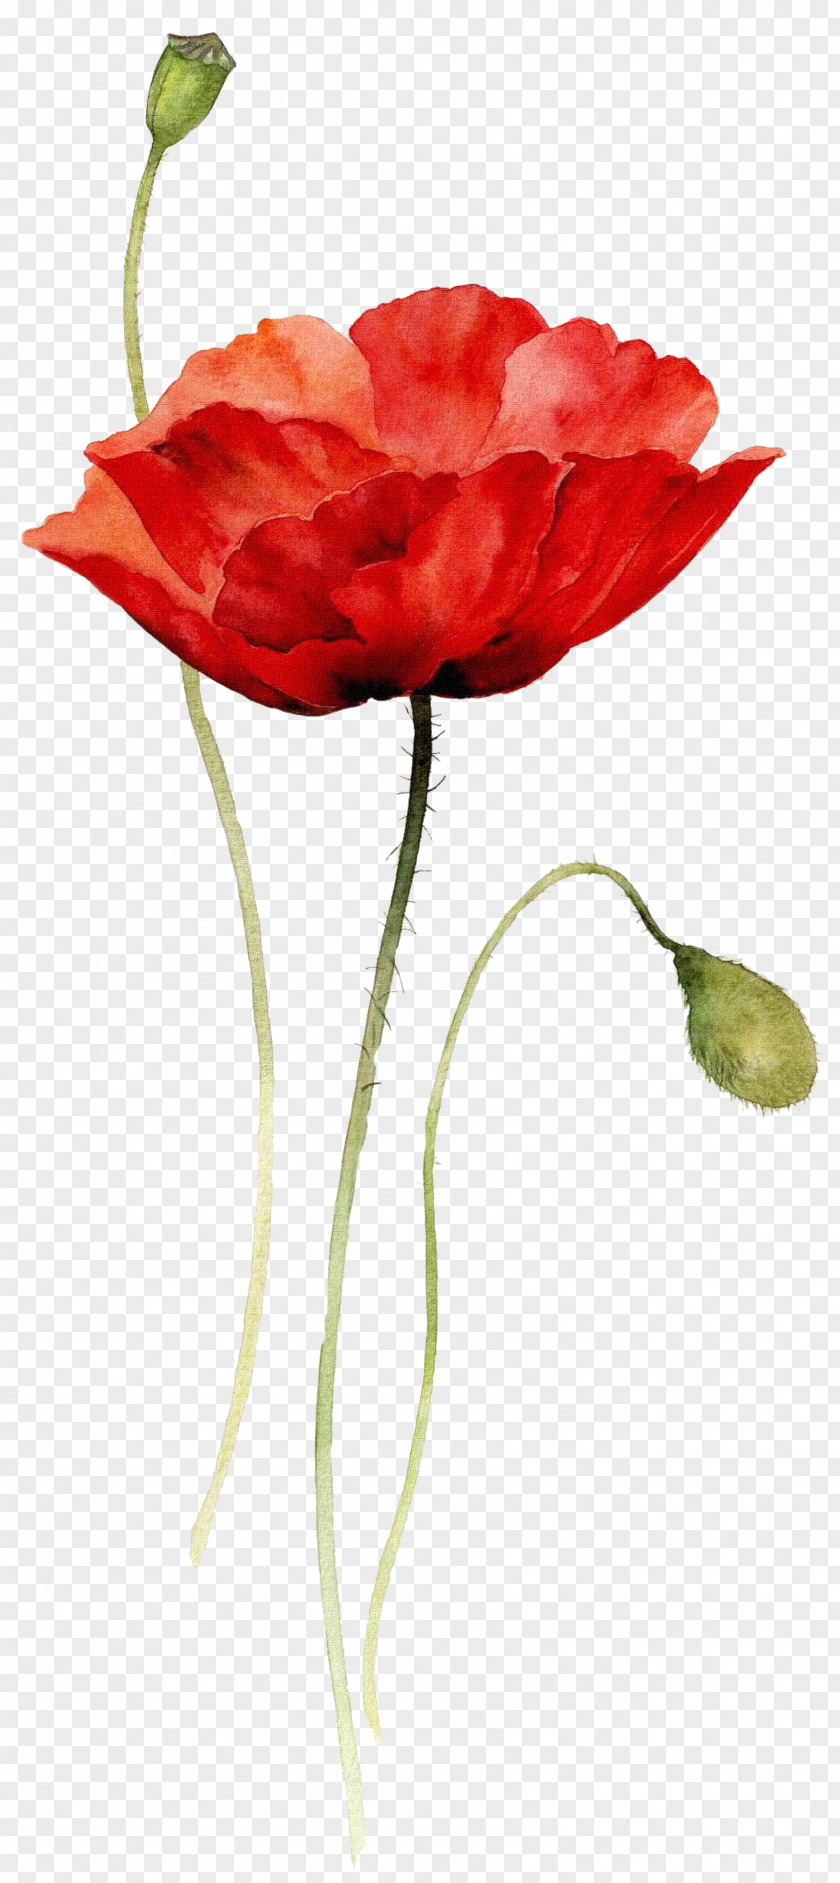 Watercolor Flowers Painting Drawing Flower Poppy PNG